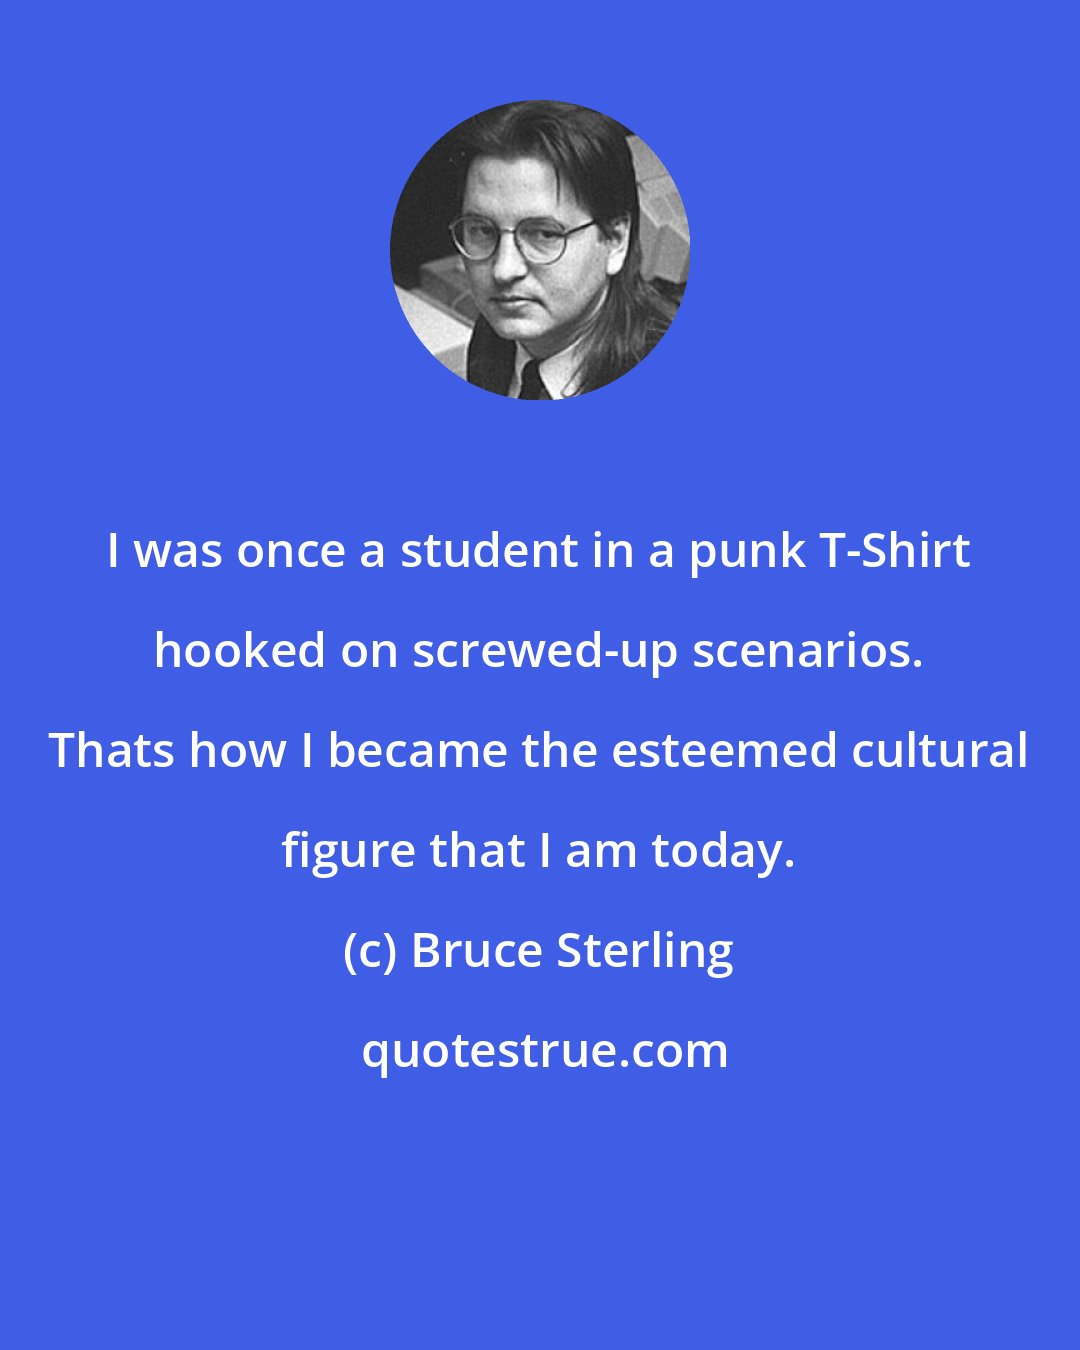 Bruce Sterling: I was once a student in a punk T-Shirt hooked on screwed-up scenarios. Thats how I became the esteemed cultural figure that I am today.